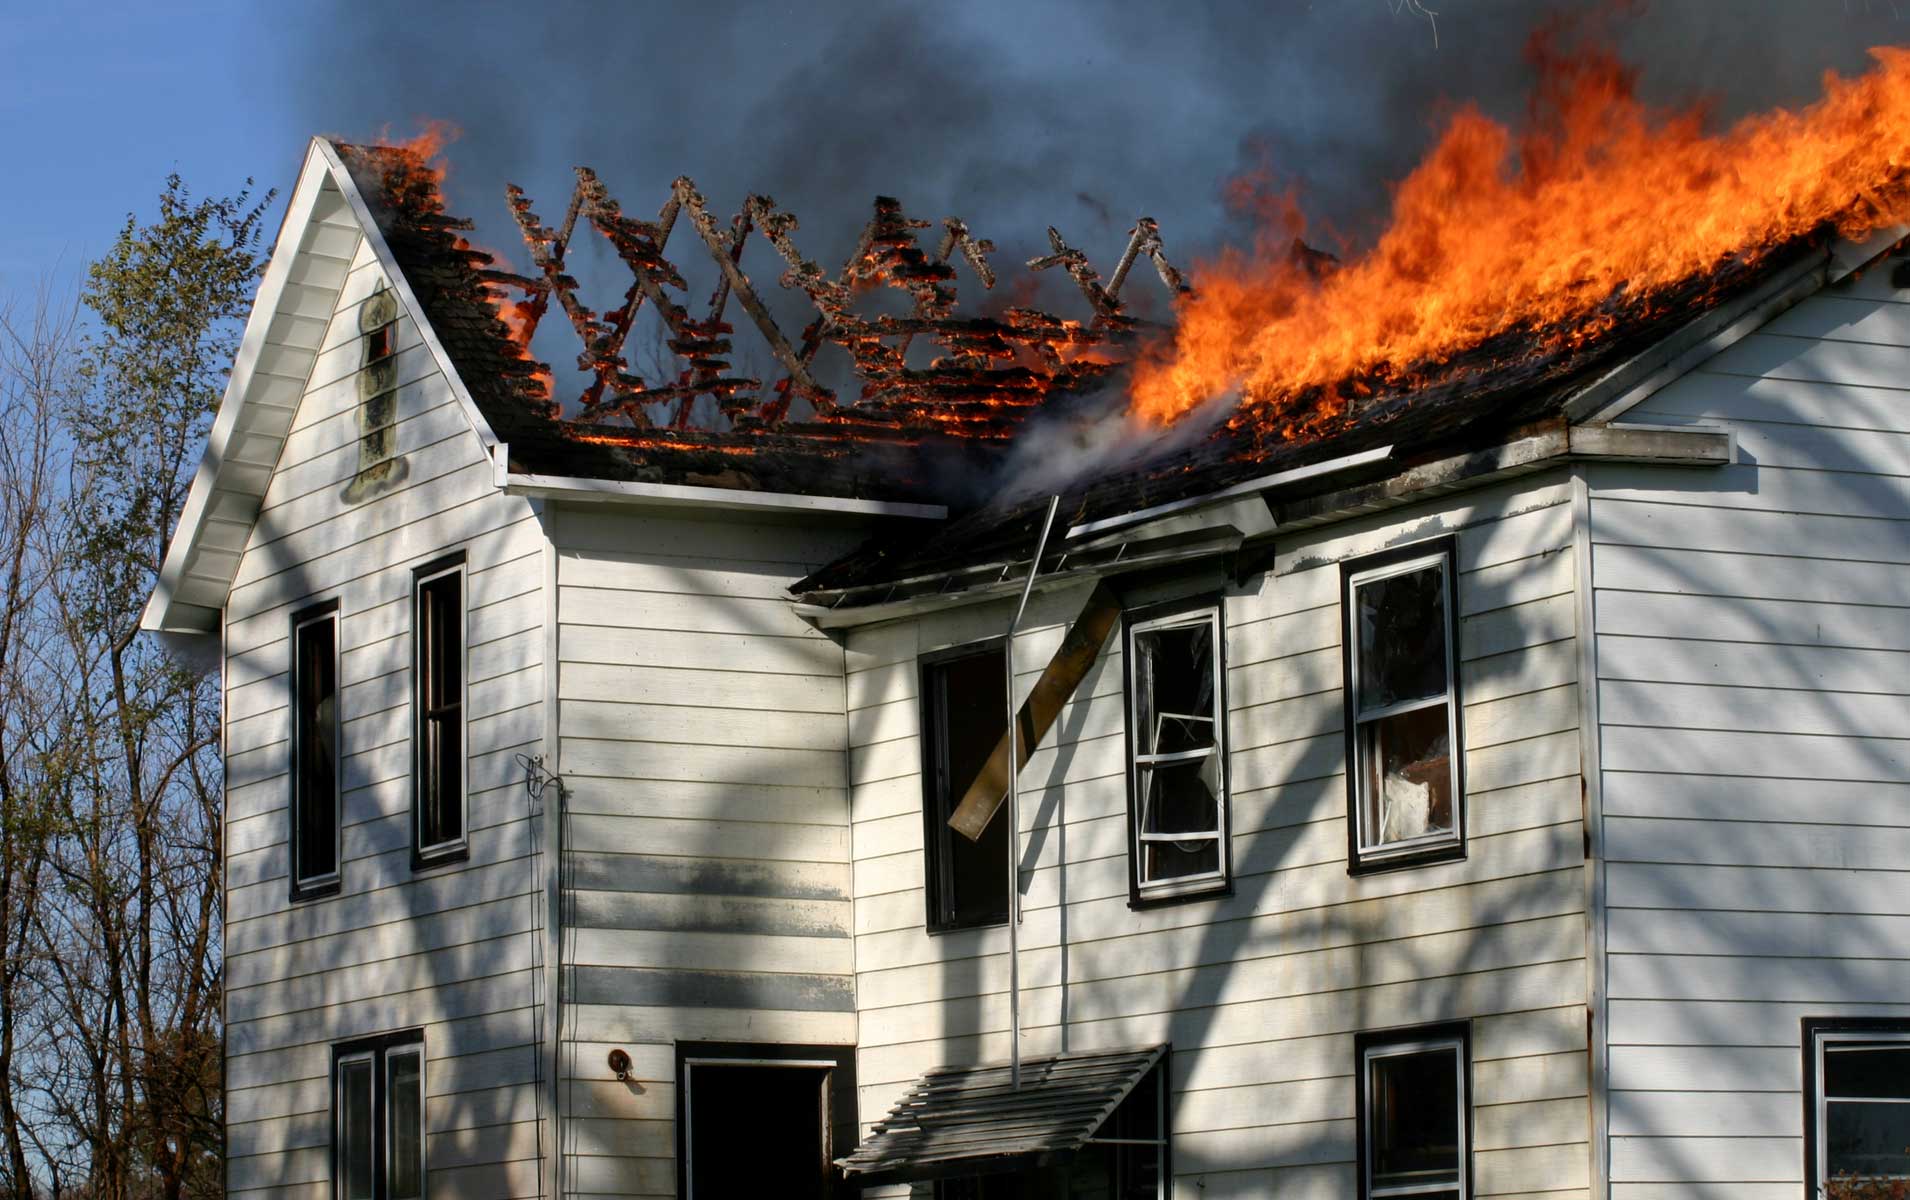 What Are The Next Steps After A Devastating House Fire?